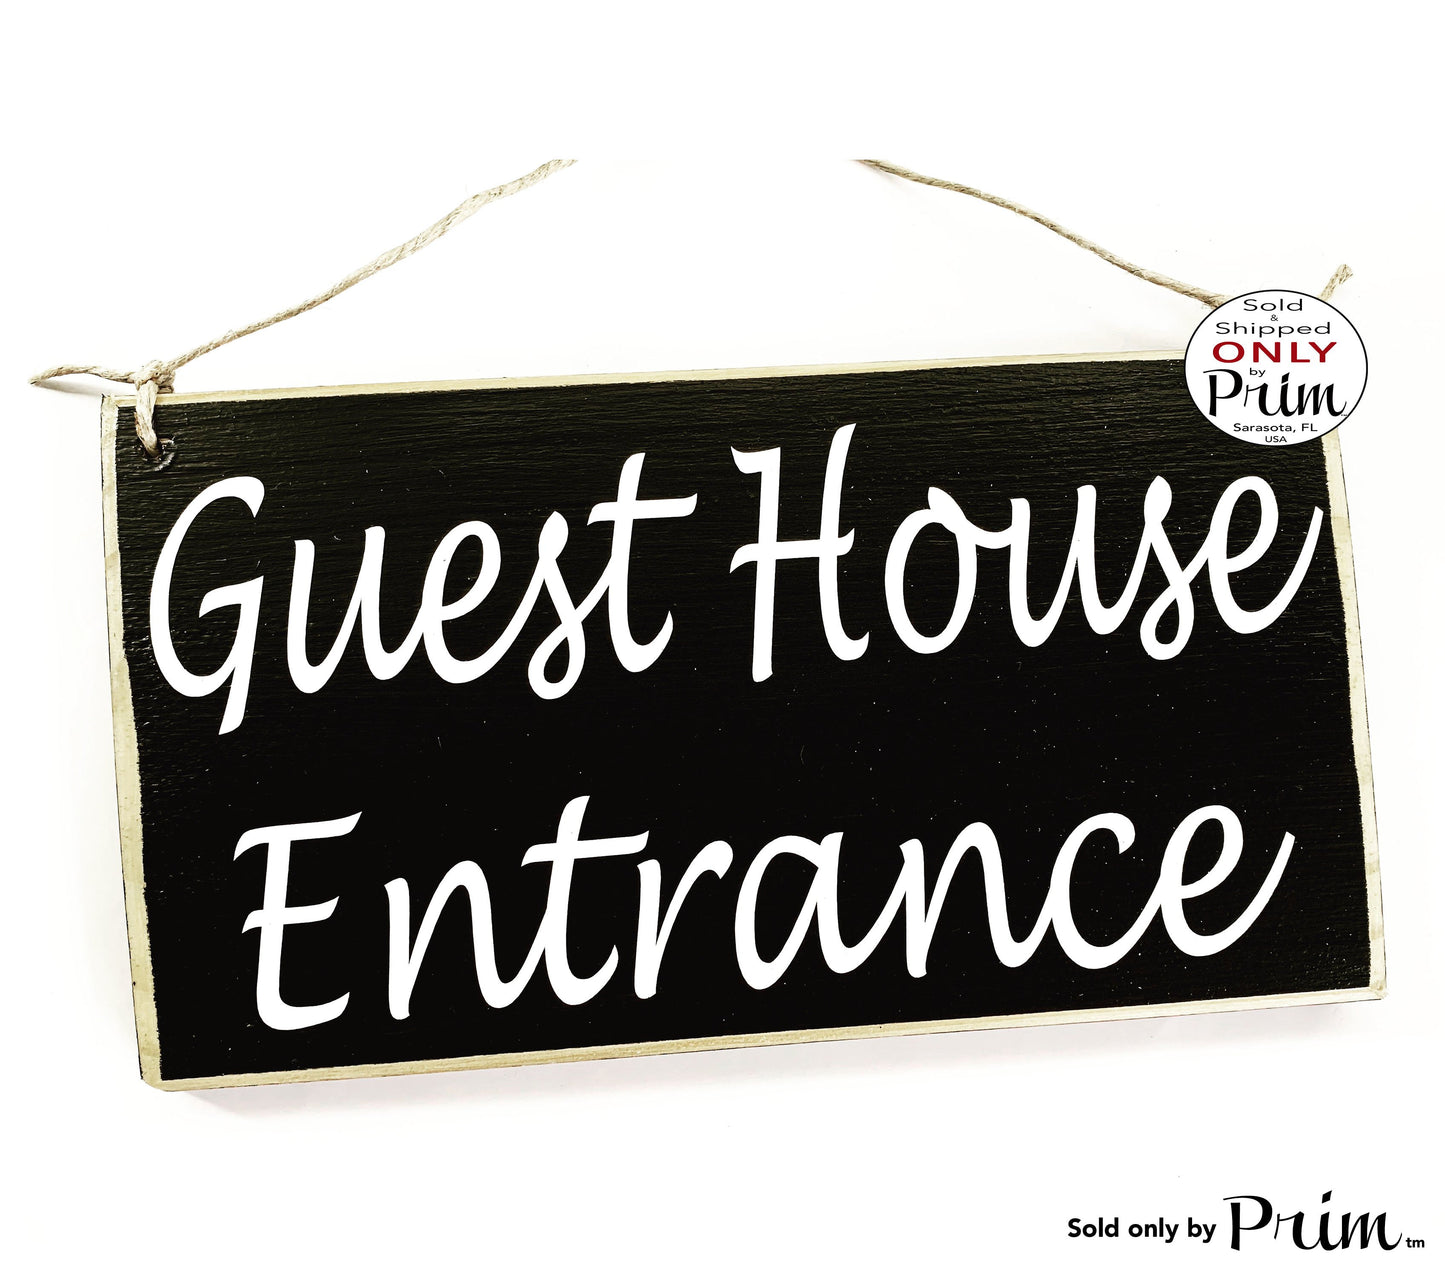 10x6 Guest House Entrance Custom Wood Sign Welcome Suite Quarters Cottage Bed and Breakfast AirBnb Wall Door Plaque